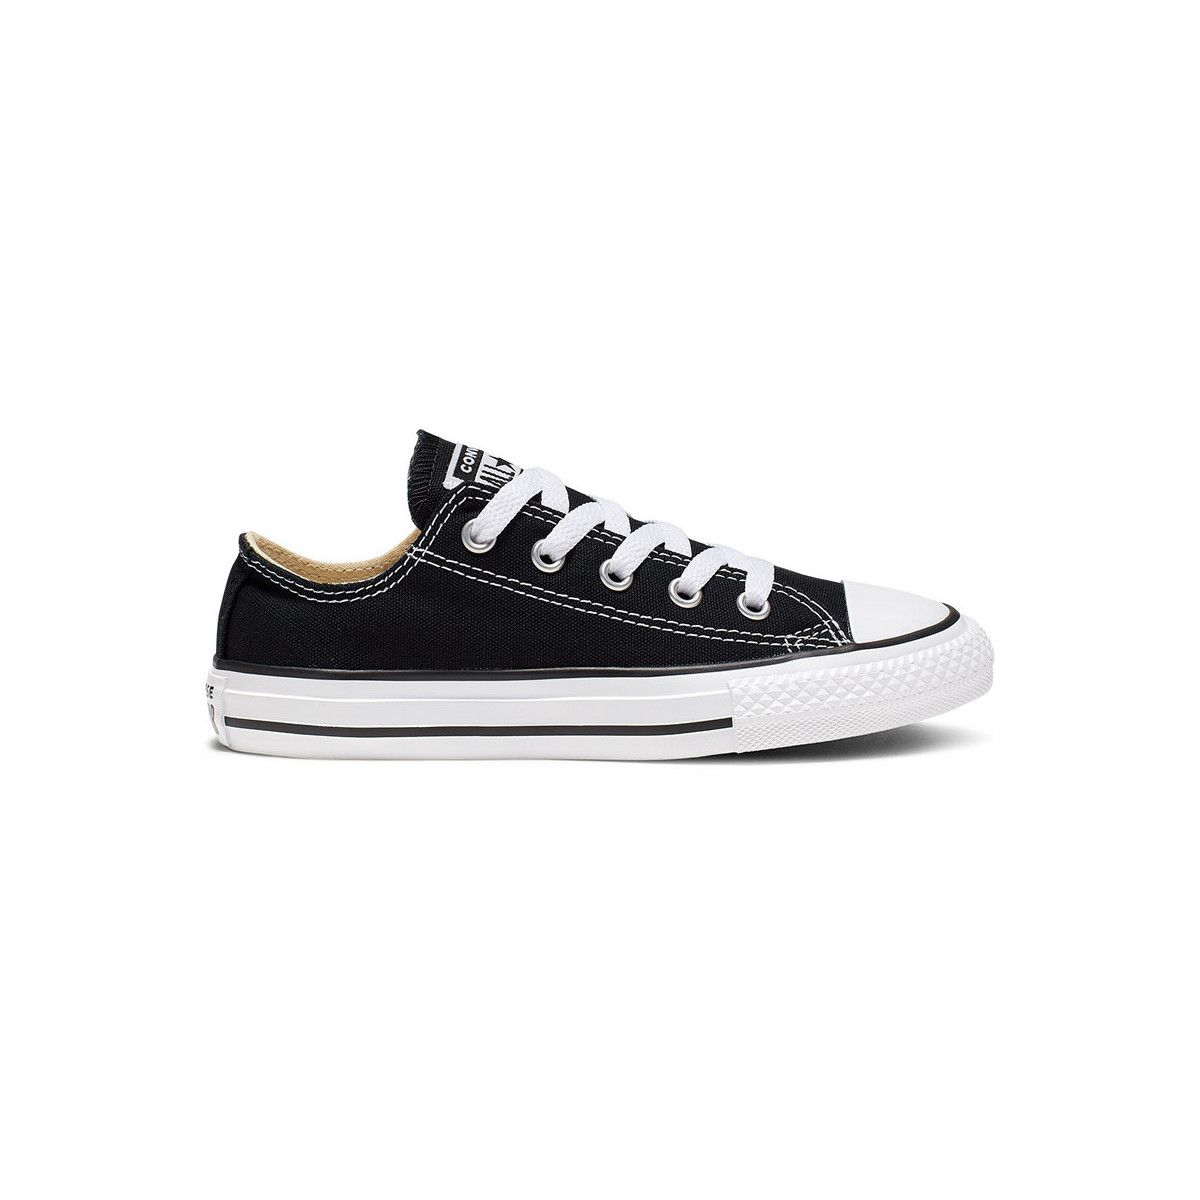 Converse Chuck Taylor All Star Low Top Kid's Shoe 3J235C